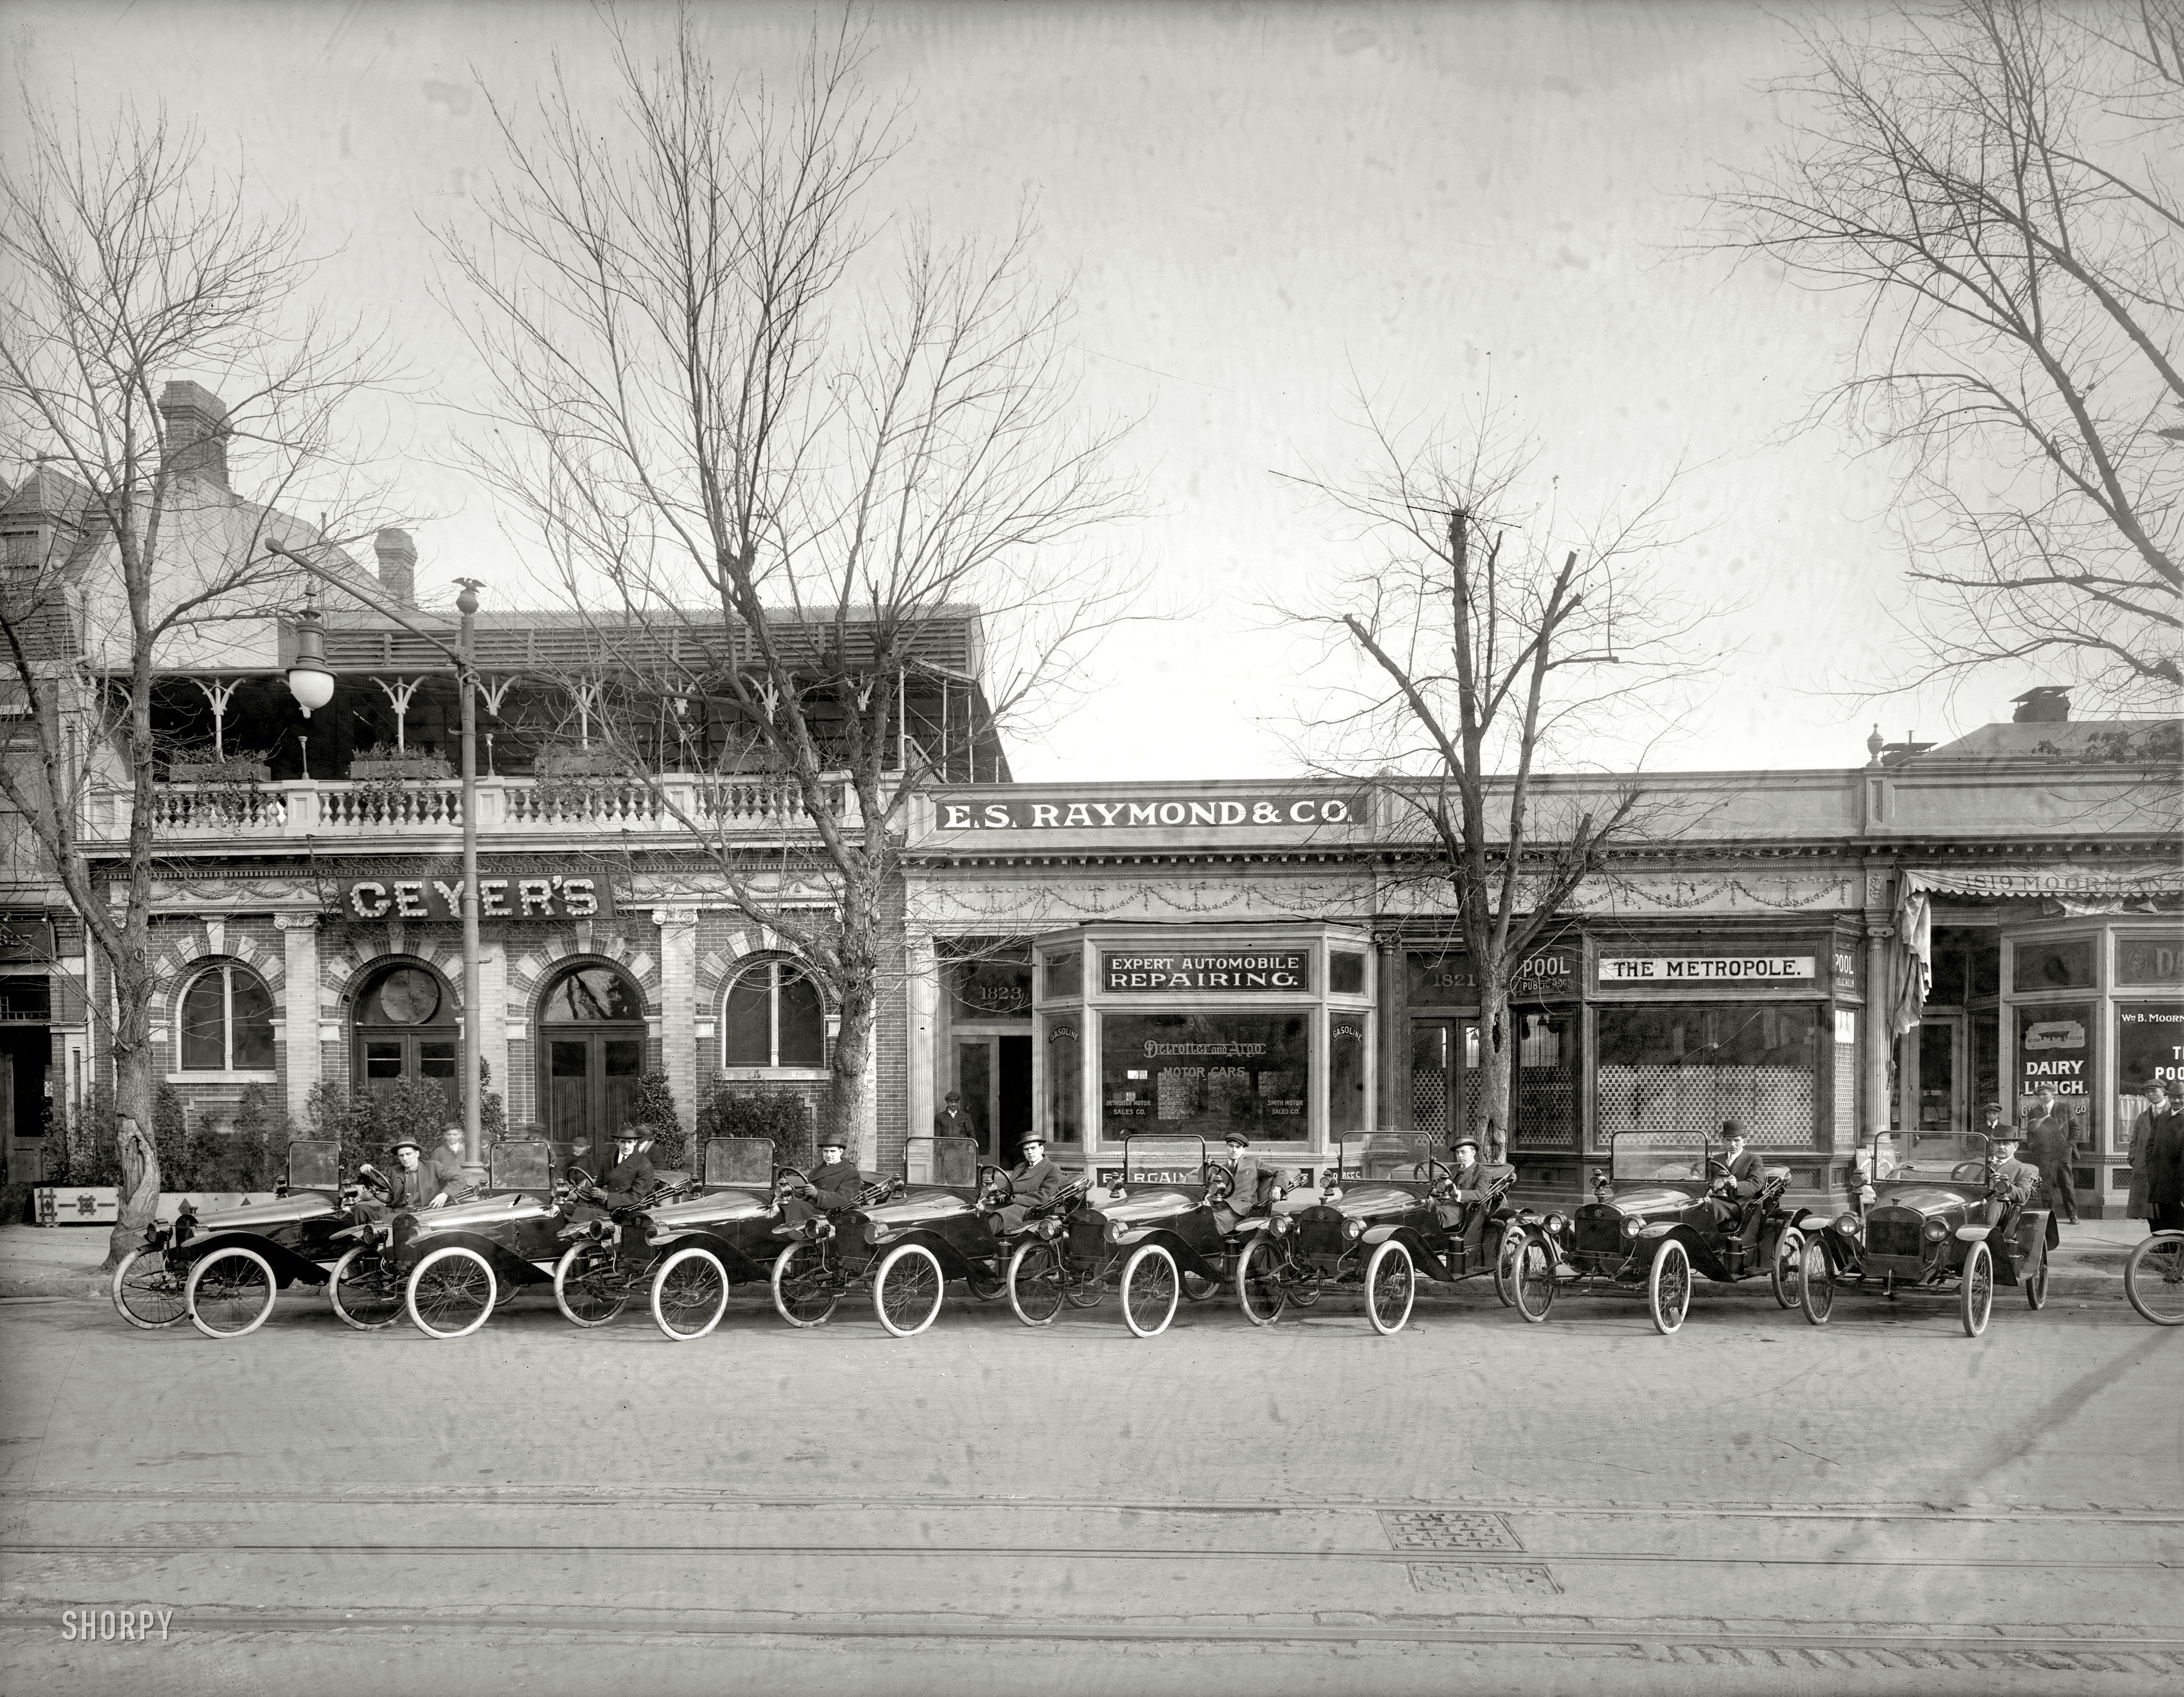 Washington, D.C., circa 1915. "W.L. Smith agency, Argo cars, 14th Street N.W." Also home, as seen here earlier, to the Square Deal Auto Exchange. National Photo Company Collection glass negative. View full size.